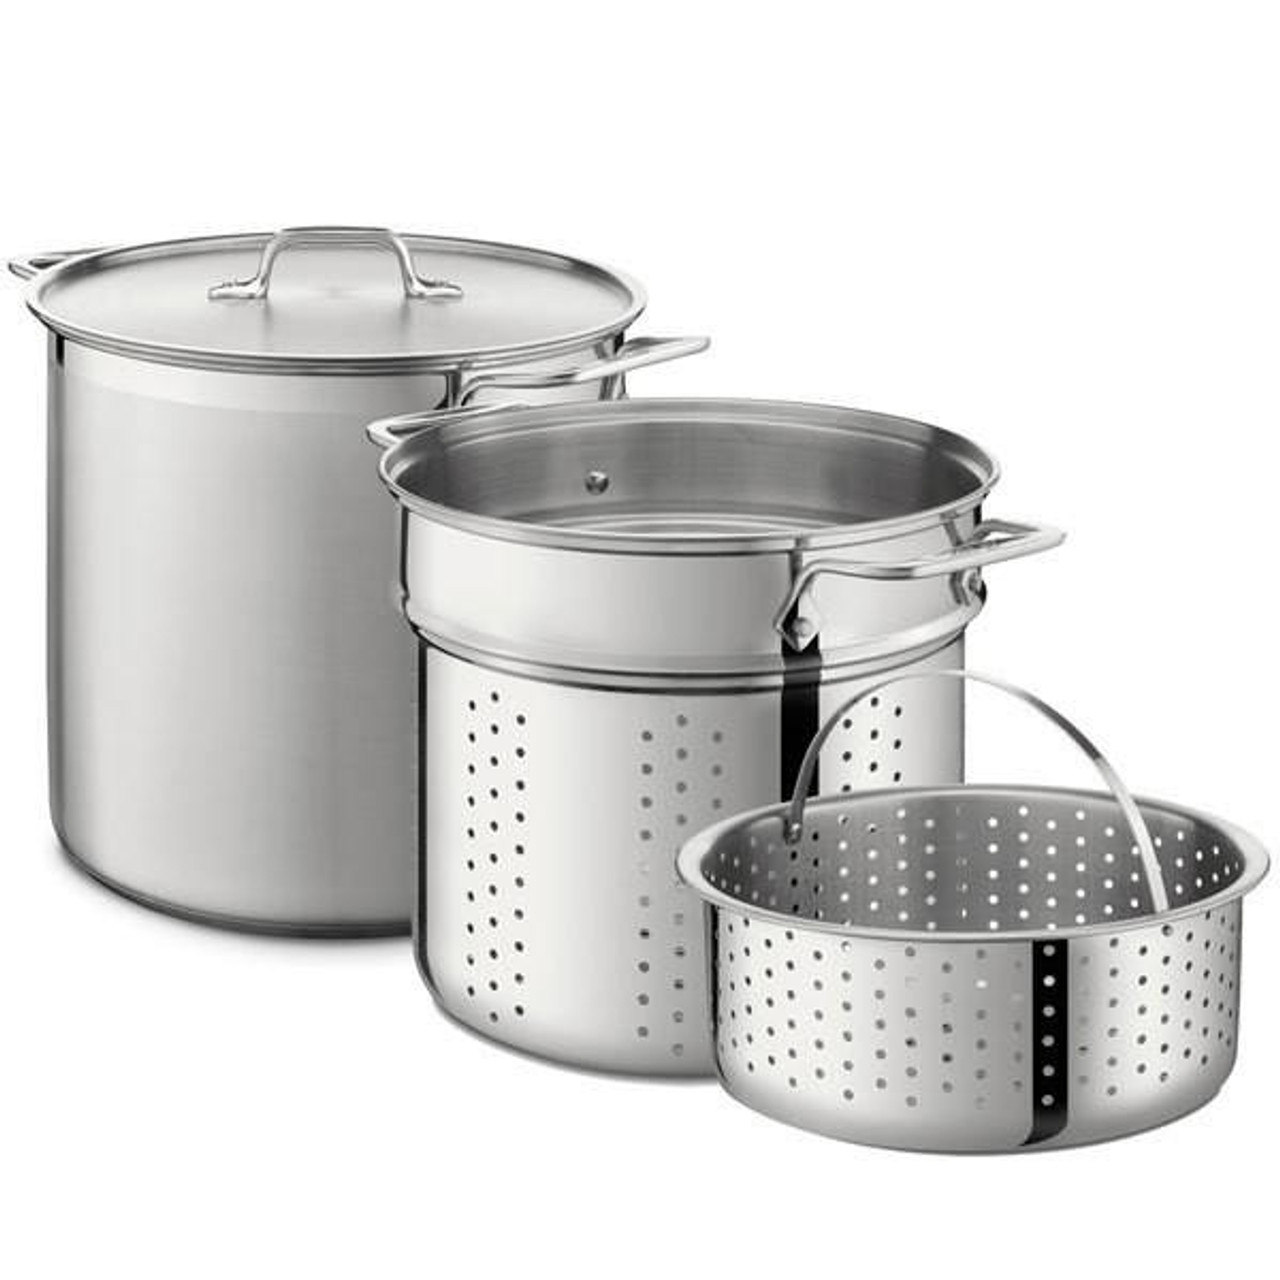 Multi Cooker - Stainless Steel, 12Qt - The Gourmet Warehouse